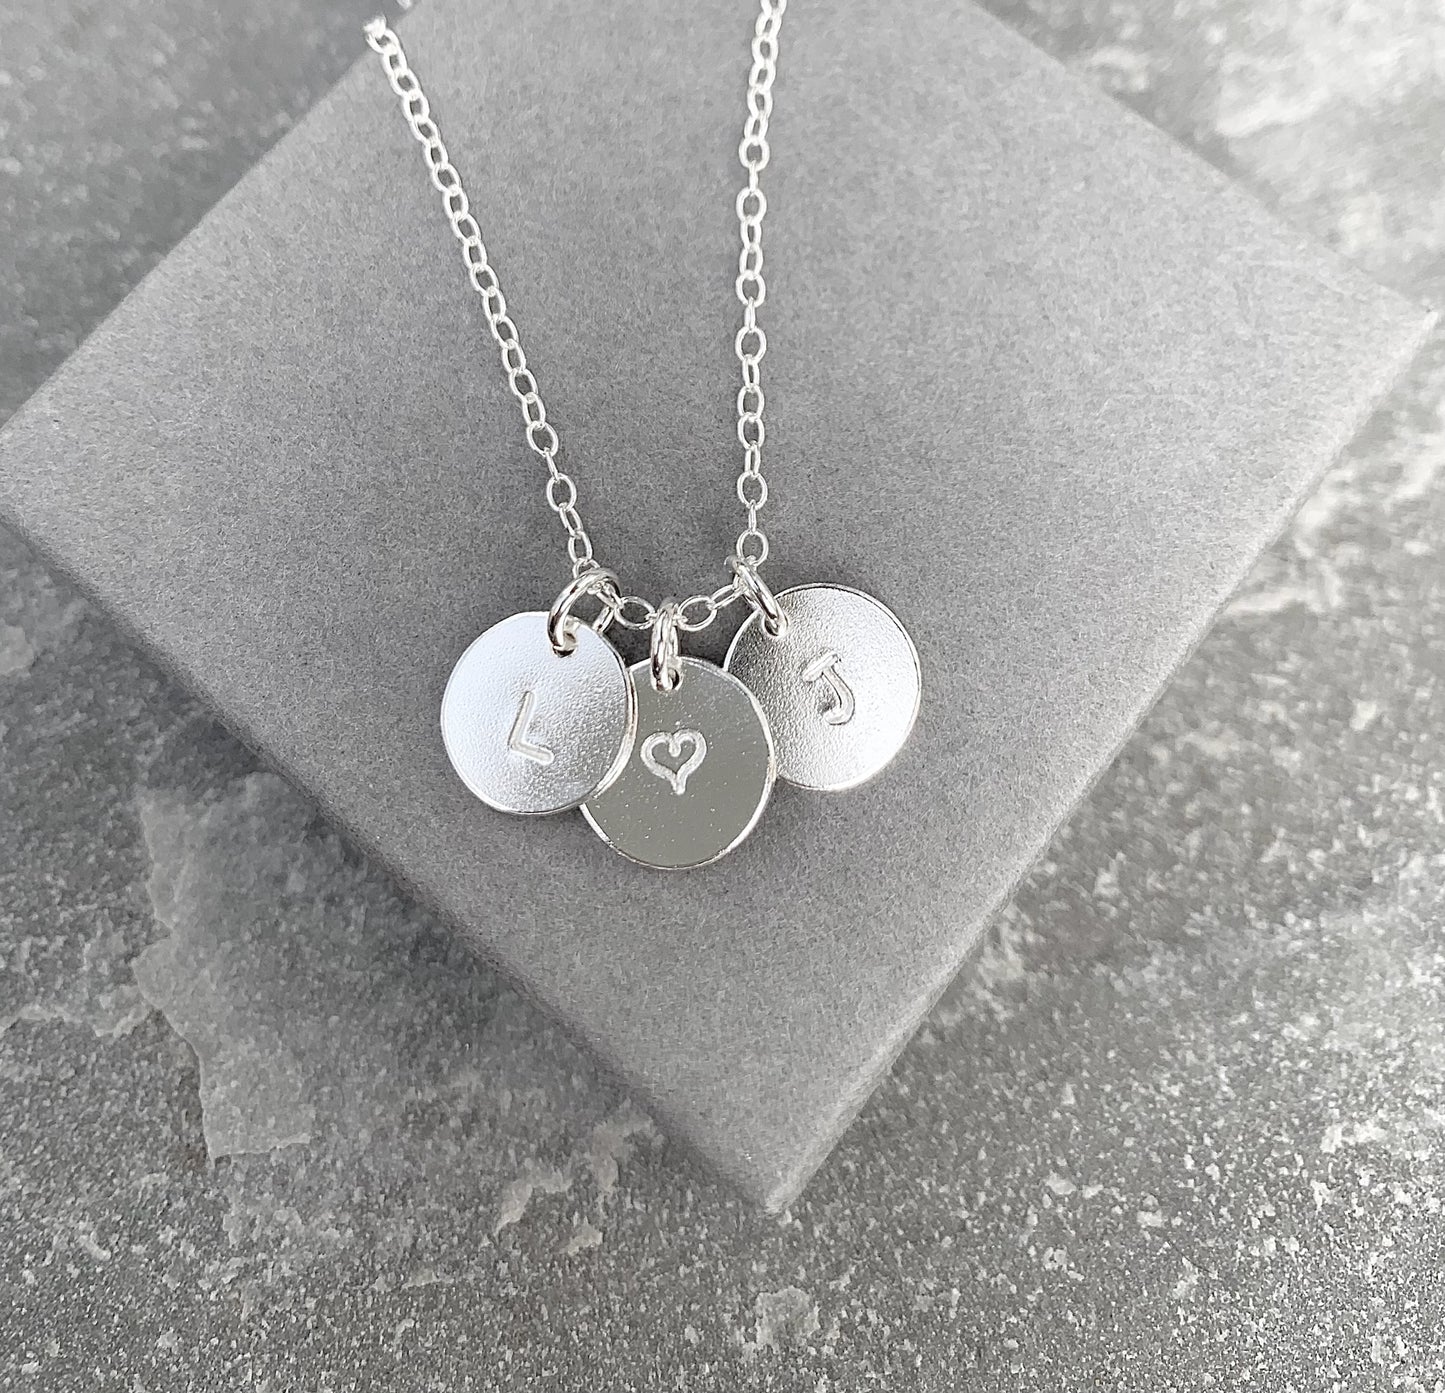 Sterling silver initials necklace